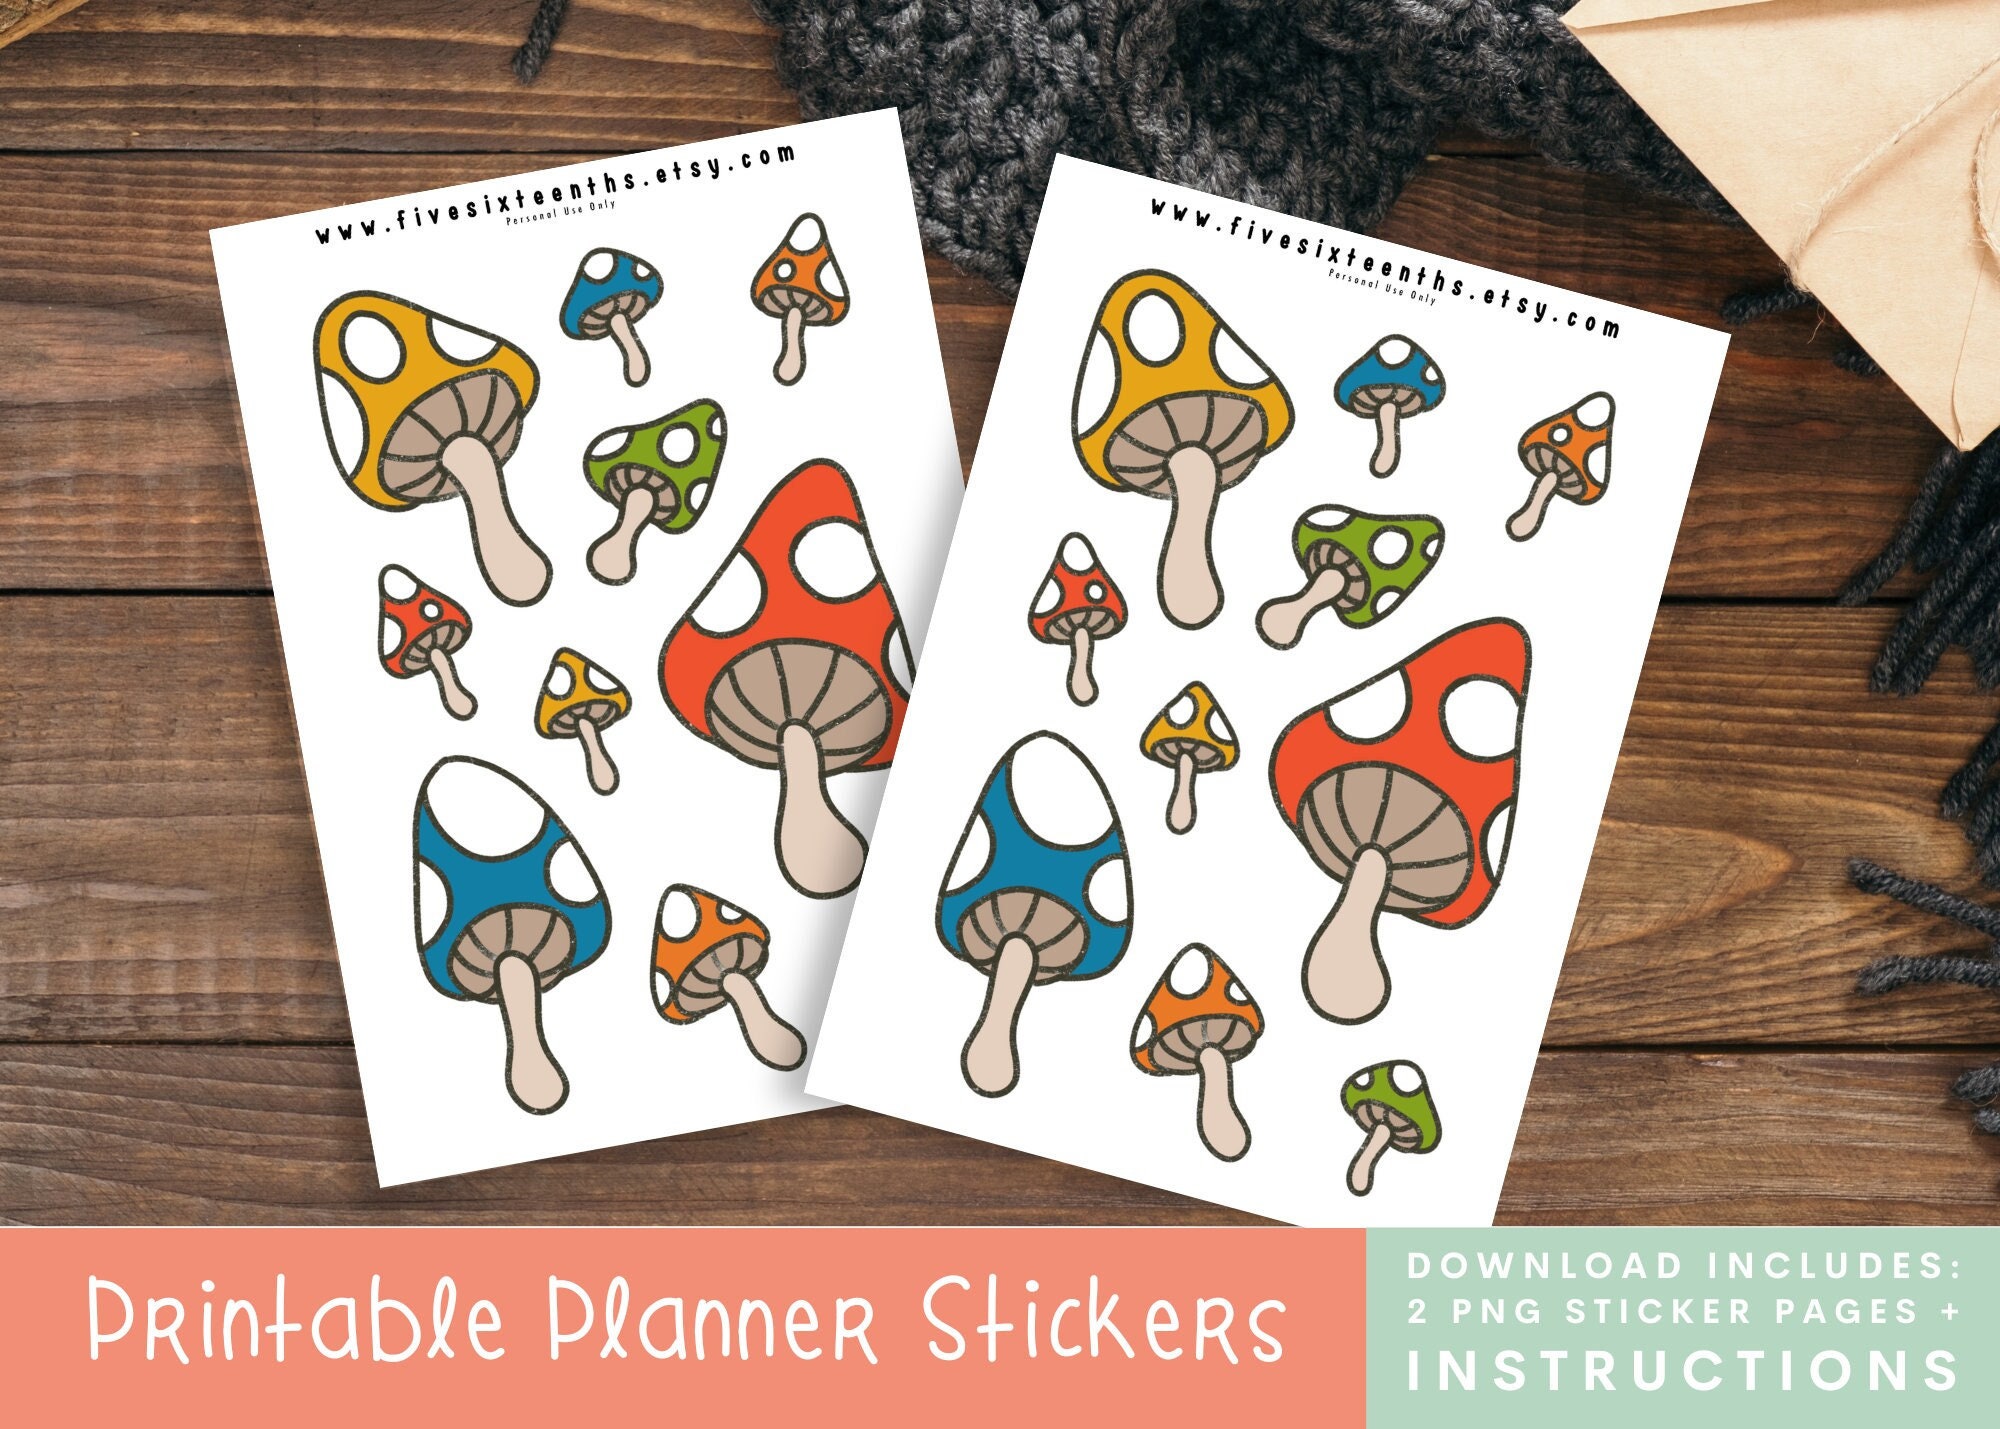 How to Make Sticker Sheets with Cricut - Michelle's Party Plan-It